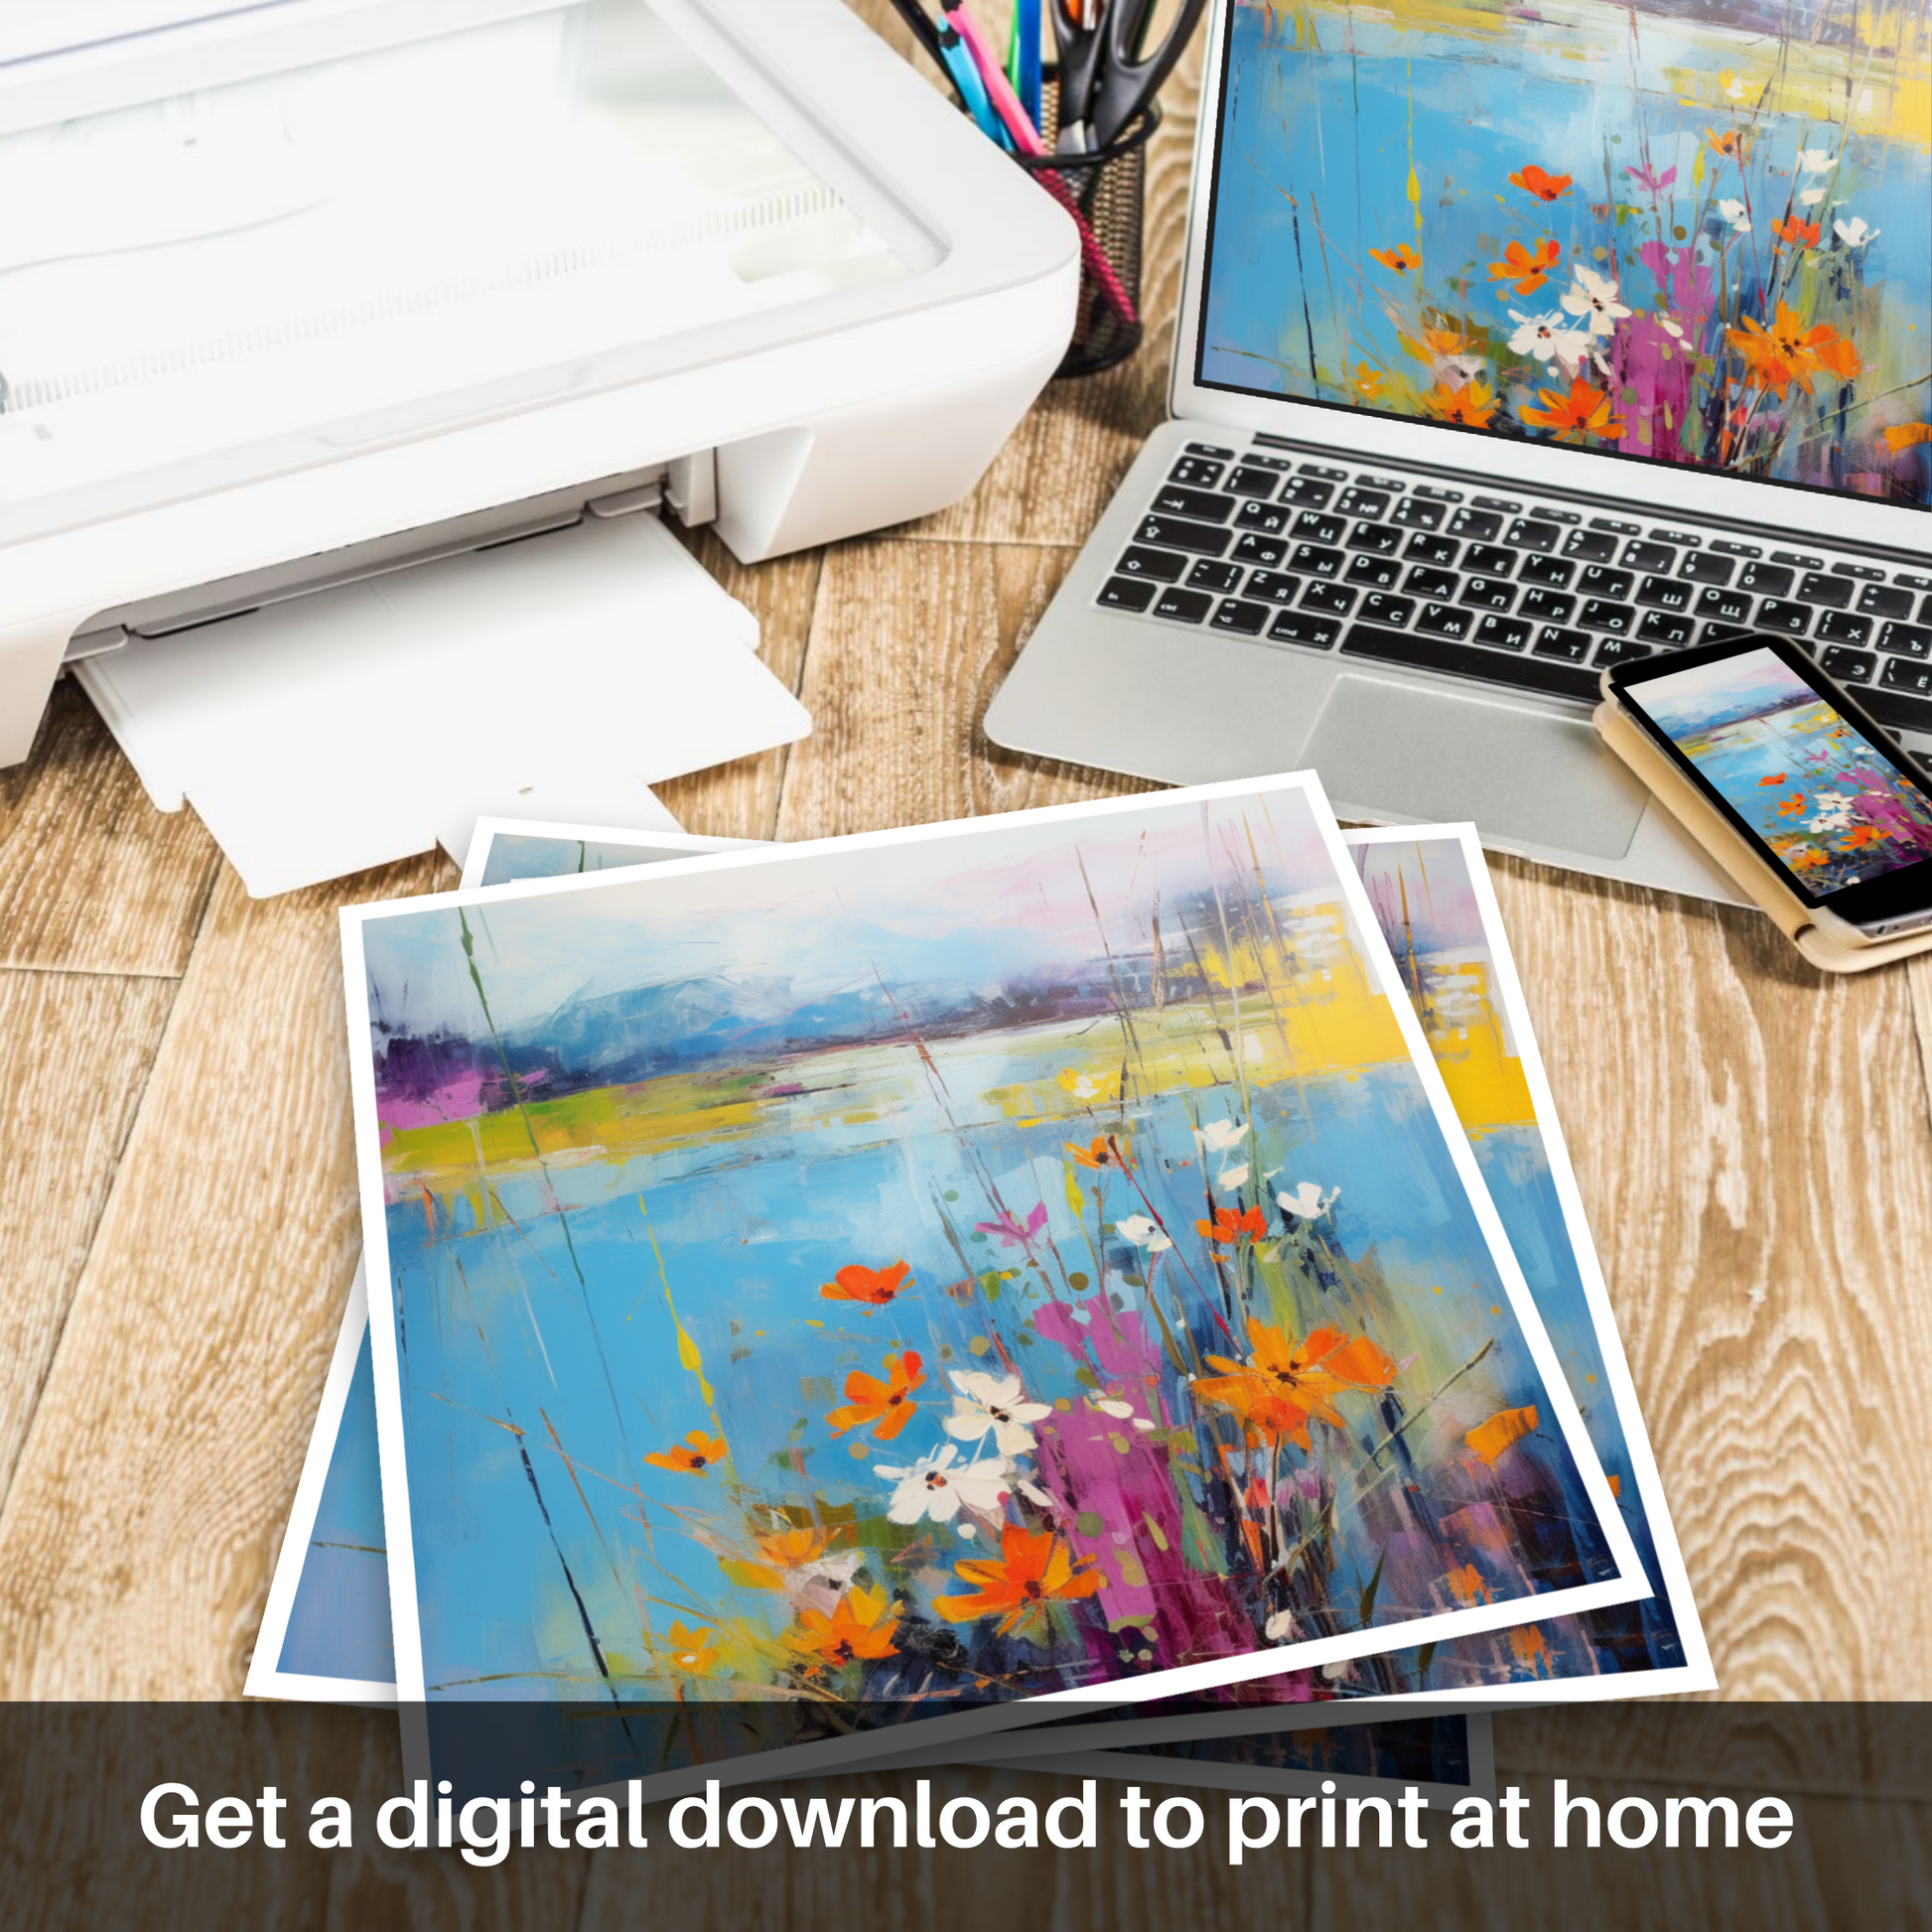 Downloadable and printable picture of Wildflowers by Loch Lomond